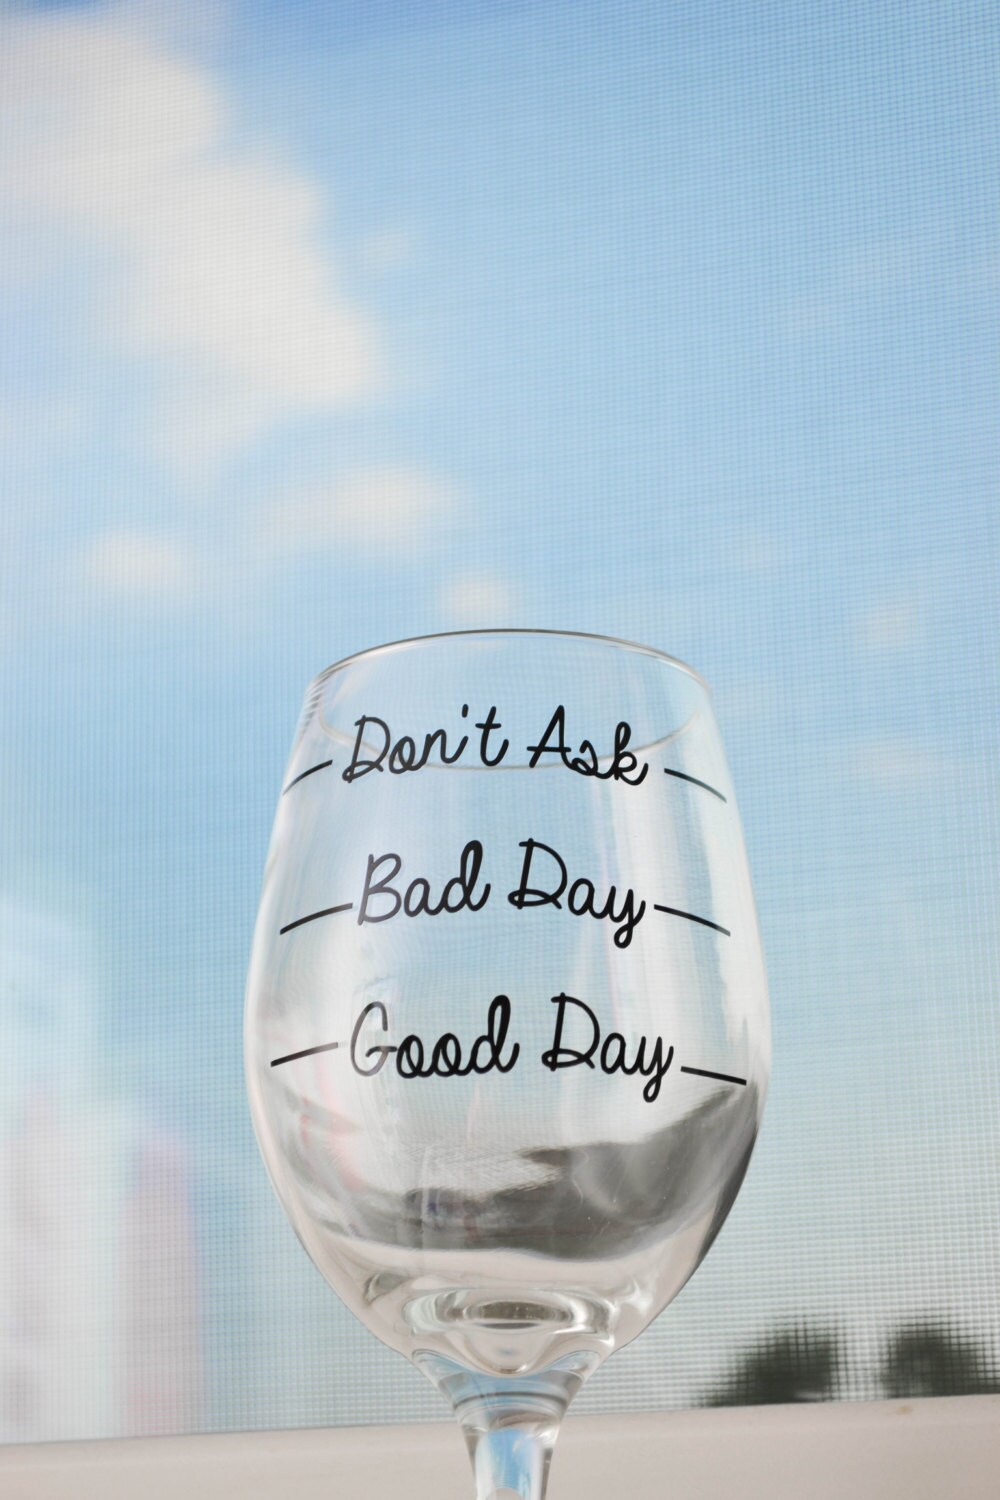 Dont day. Бокал good Day Bad Day. Бокал good Day Bad Day don't ask. Бокал с надписью good Day Bad Day. Стакан good Day.